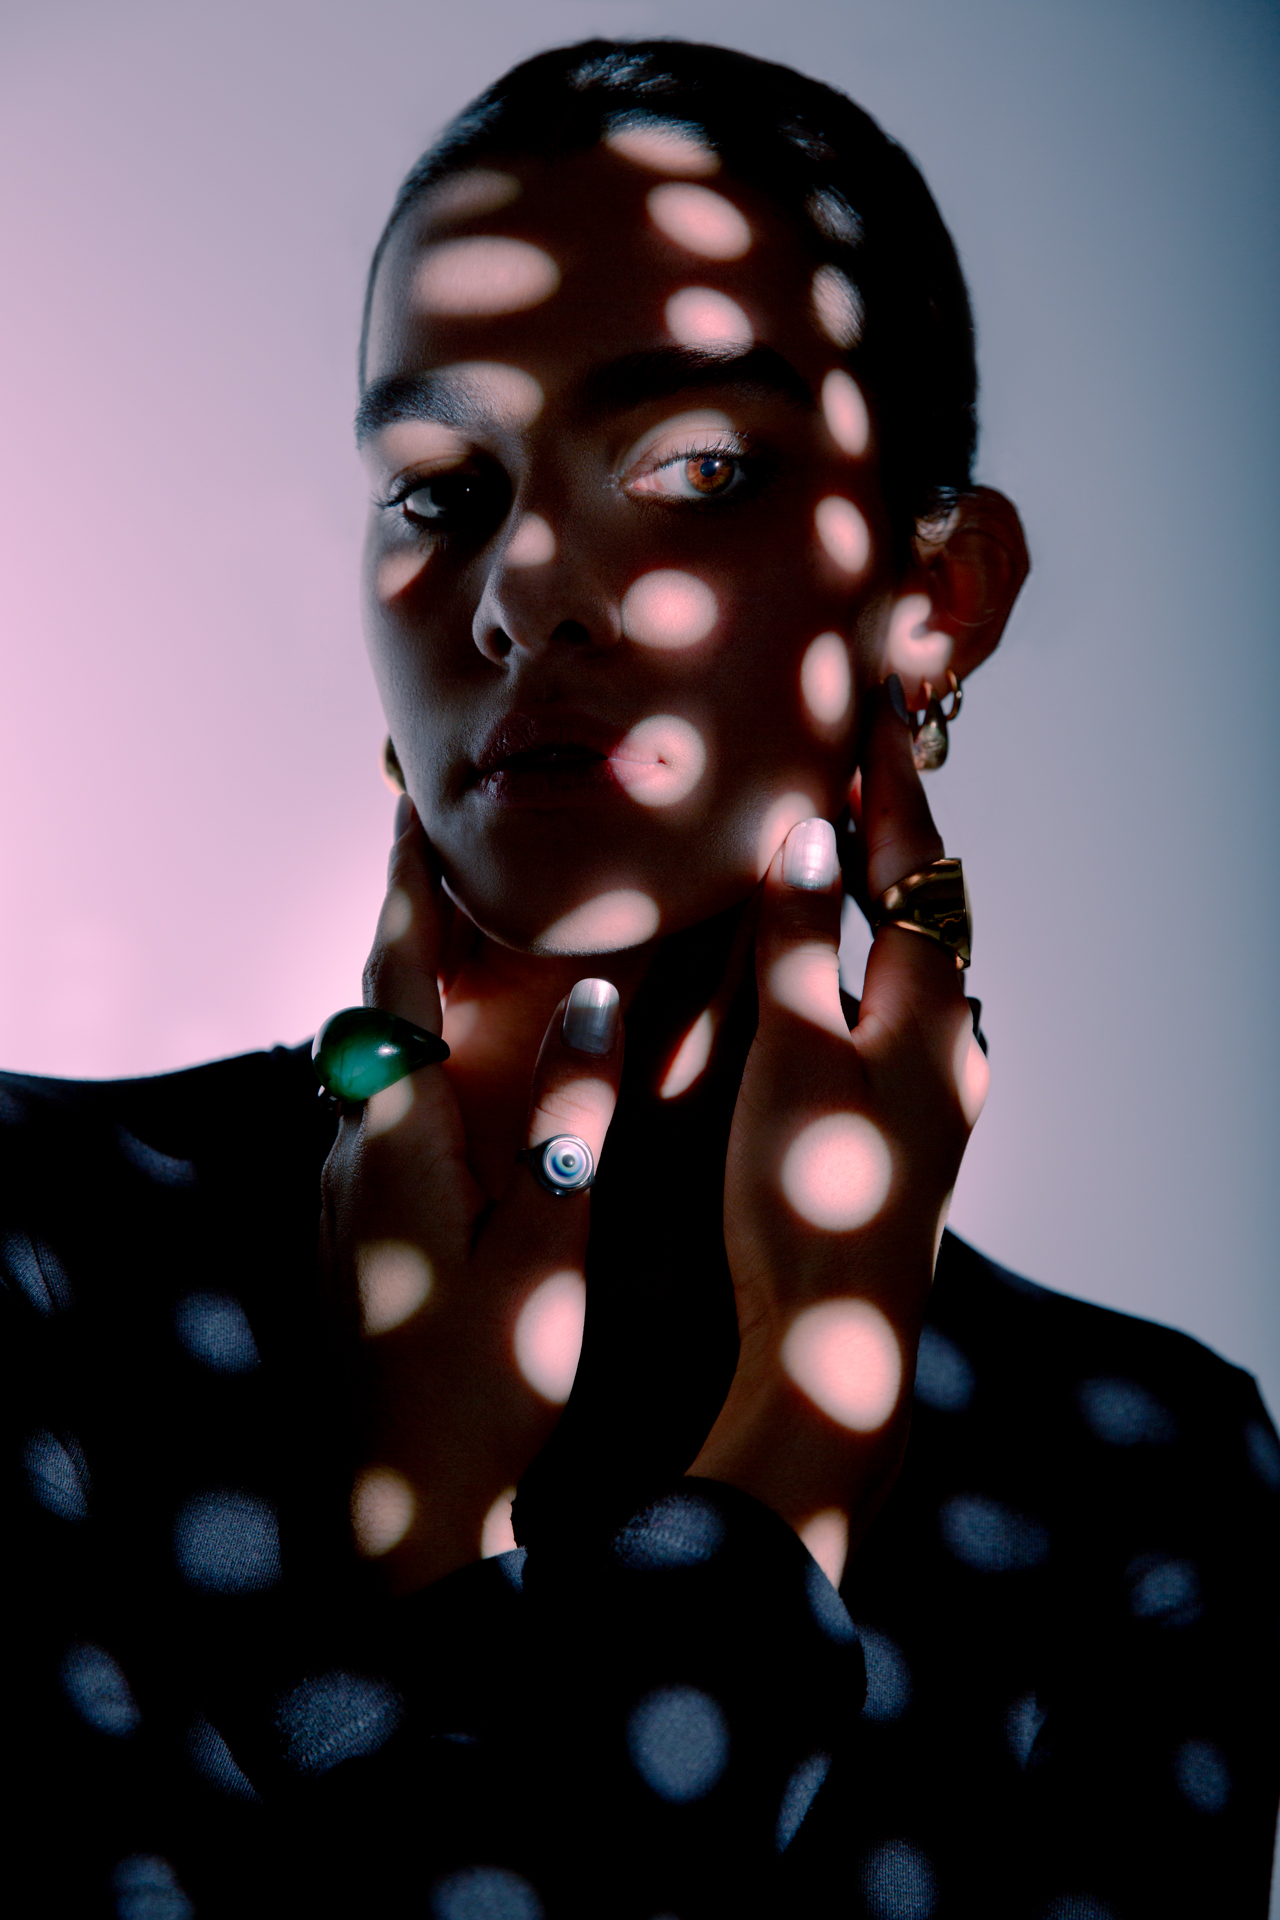 Adriana is posing with a circular pattern of lights hitting her face and upper body. She's wearing a black full sleeve top. Her accessories and eyes shine through in the light against a gradient background.